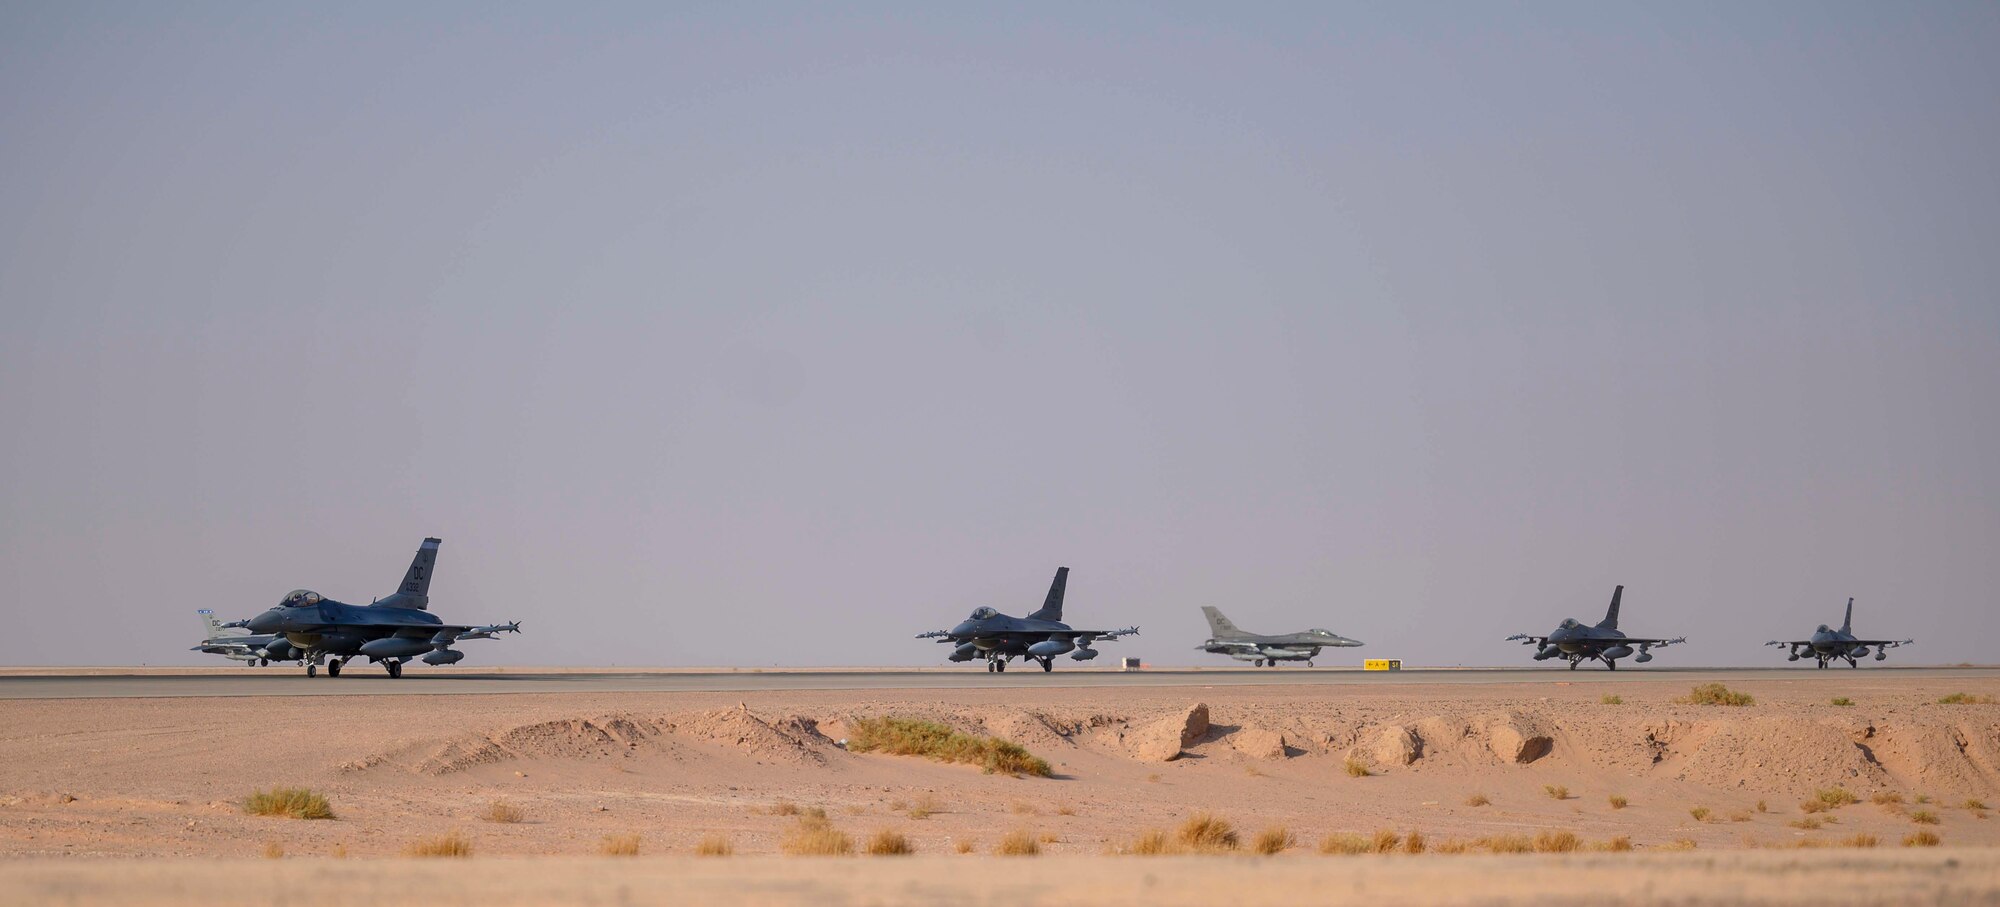 Several U.S. Air Force F-16C Fighting Falcons from District of Columbia Air National Guard’s 113th Wing, known as the “Capital Guardians,” taxi on the flight line upon arrival at Prince Sultan Air Base, Kingdom of Saudi Arabia, July 9, 2021. The wing deployed a contingent of F-16s to PSAB to reinforce the base’s defensive capabilities, provide operational depth, and support U.S. Central Command operations in the region. (U.S. Air Force Photo by Senior Airman Samuel Earick)